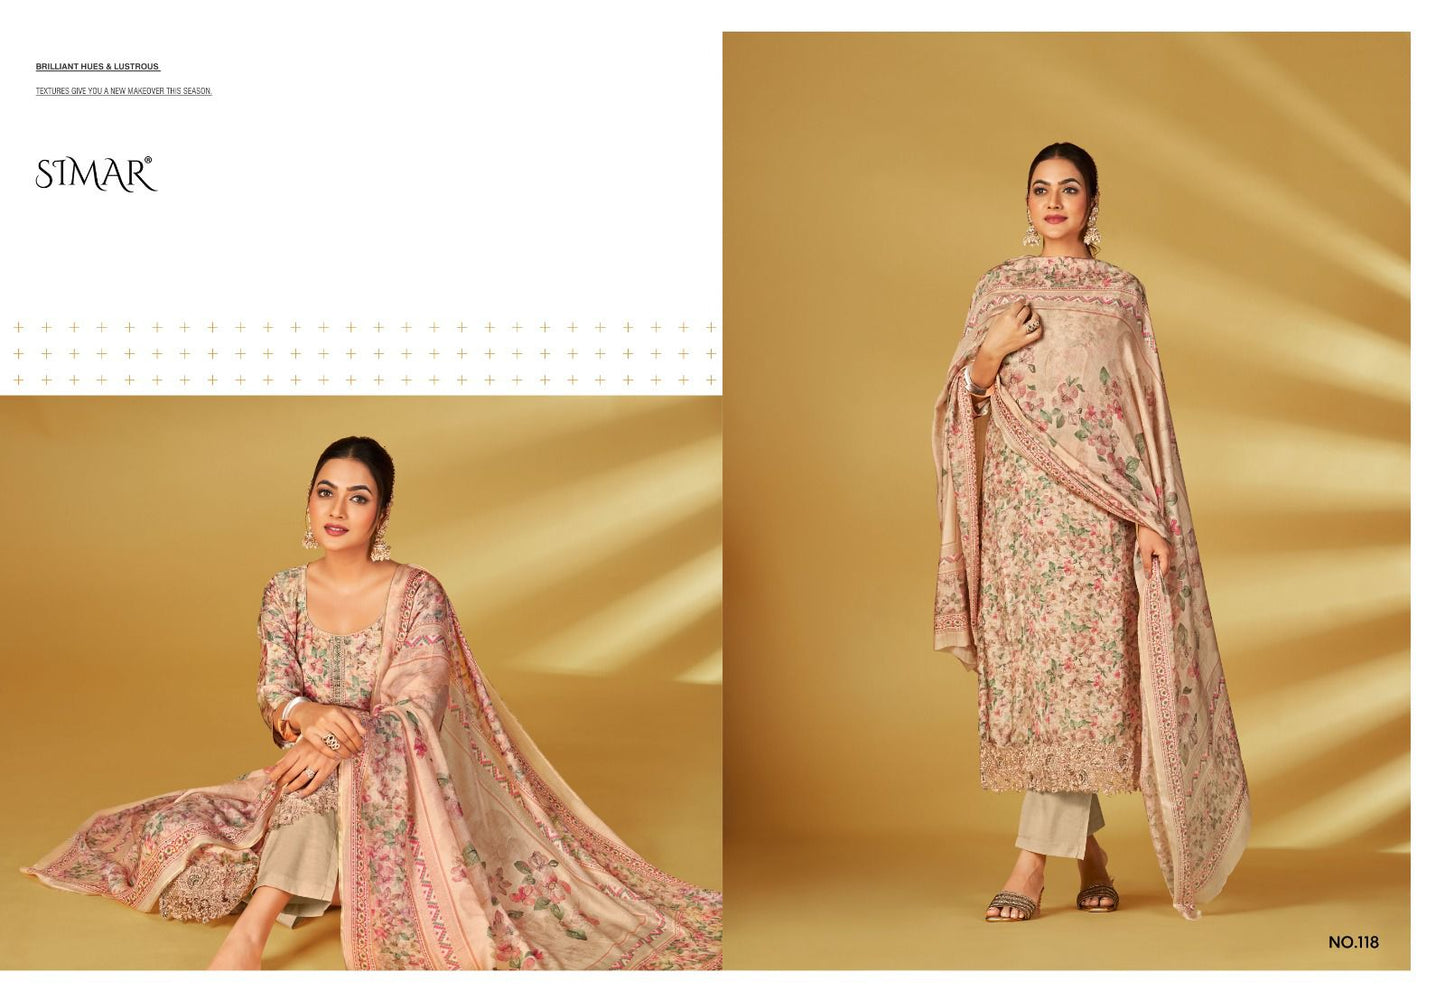 Haseen Simar Pure Viscose Plazzo Style Suits